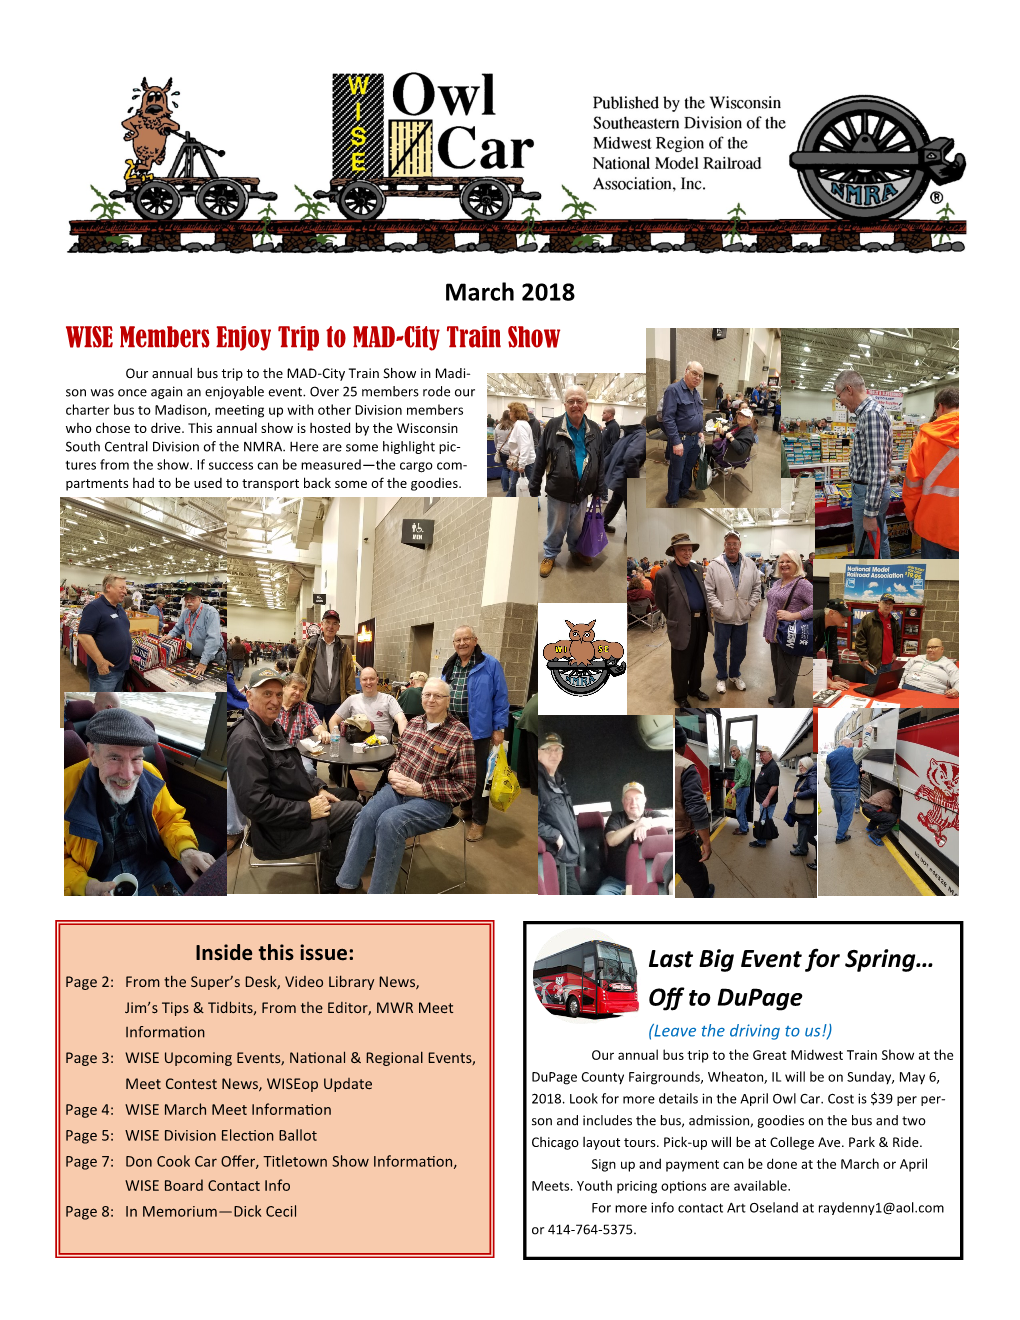 March 2018 Last Big Event for Spring… Off to Dupage WISE Members